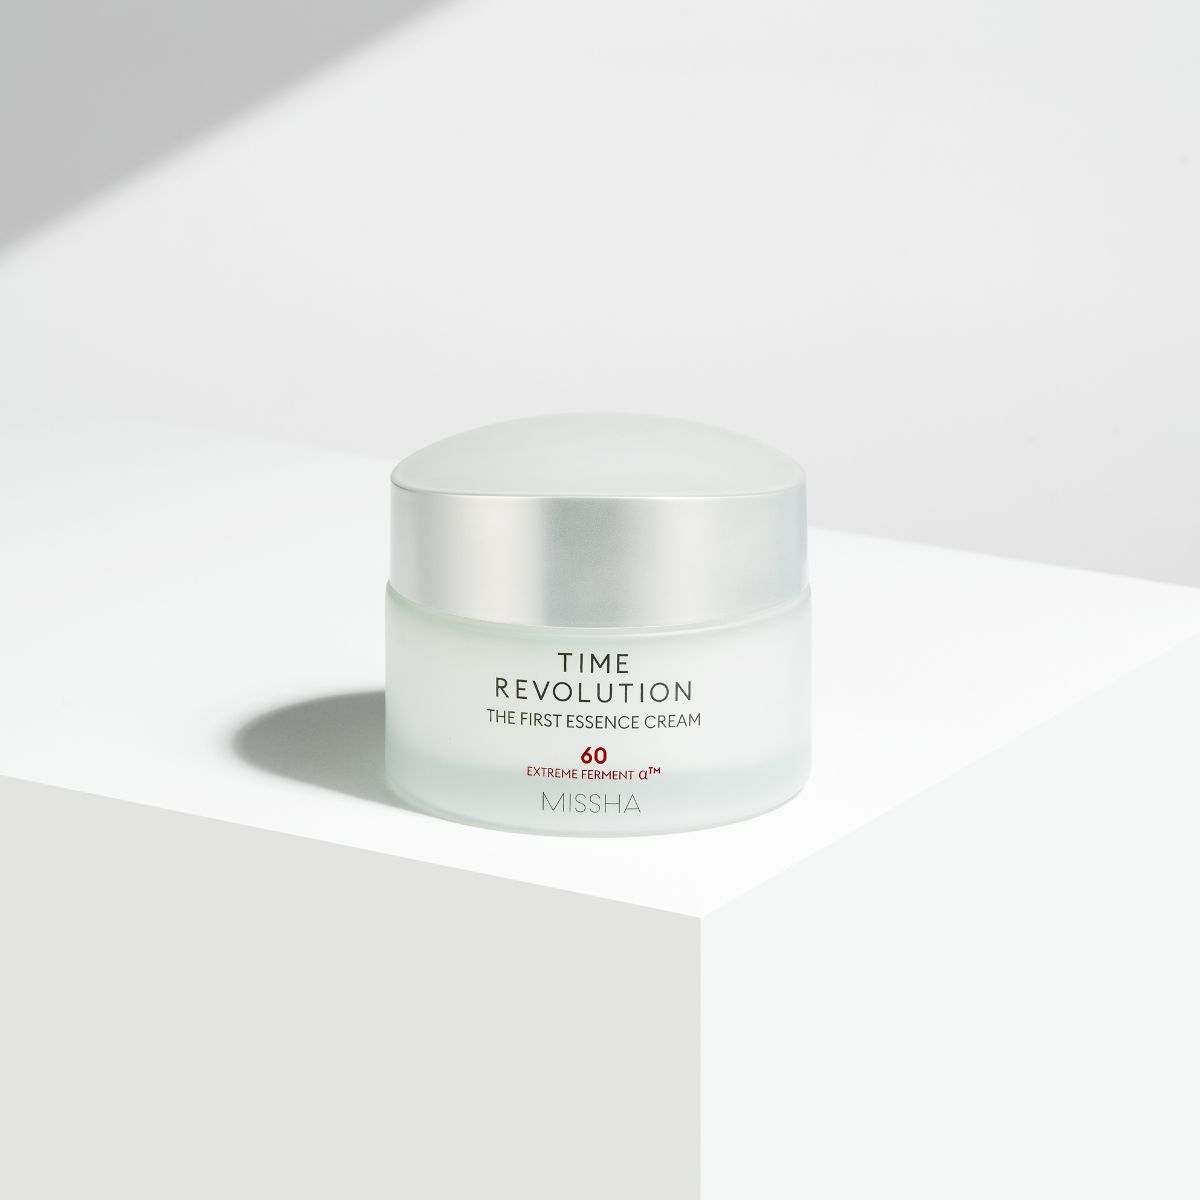 TIME REVOLUTION THE FIRST ESSENCE CREAM